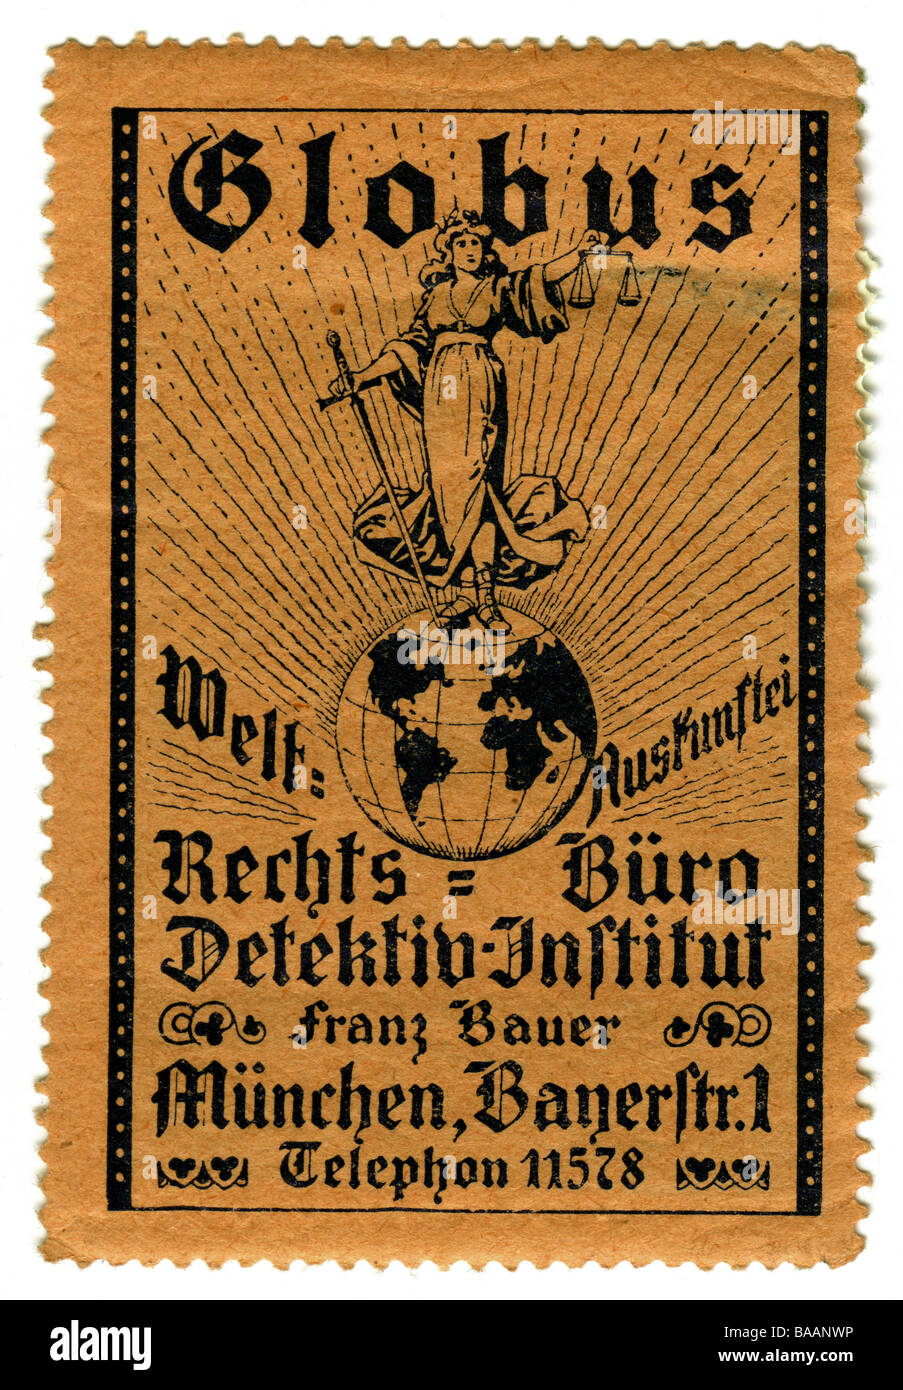 advertising, stamps, Globus detective agency, Munich, Germany, circa 1910, historic, historical, trade, collecting stamp, clipping, advertisment, 20th century, 1910s, lawyer, advocate, institute, Bayerstrasse 1, Lady Justice, people, Stock Photo